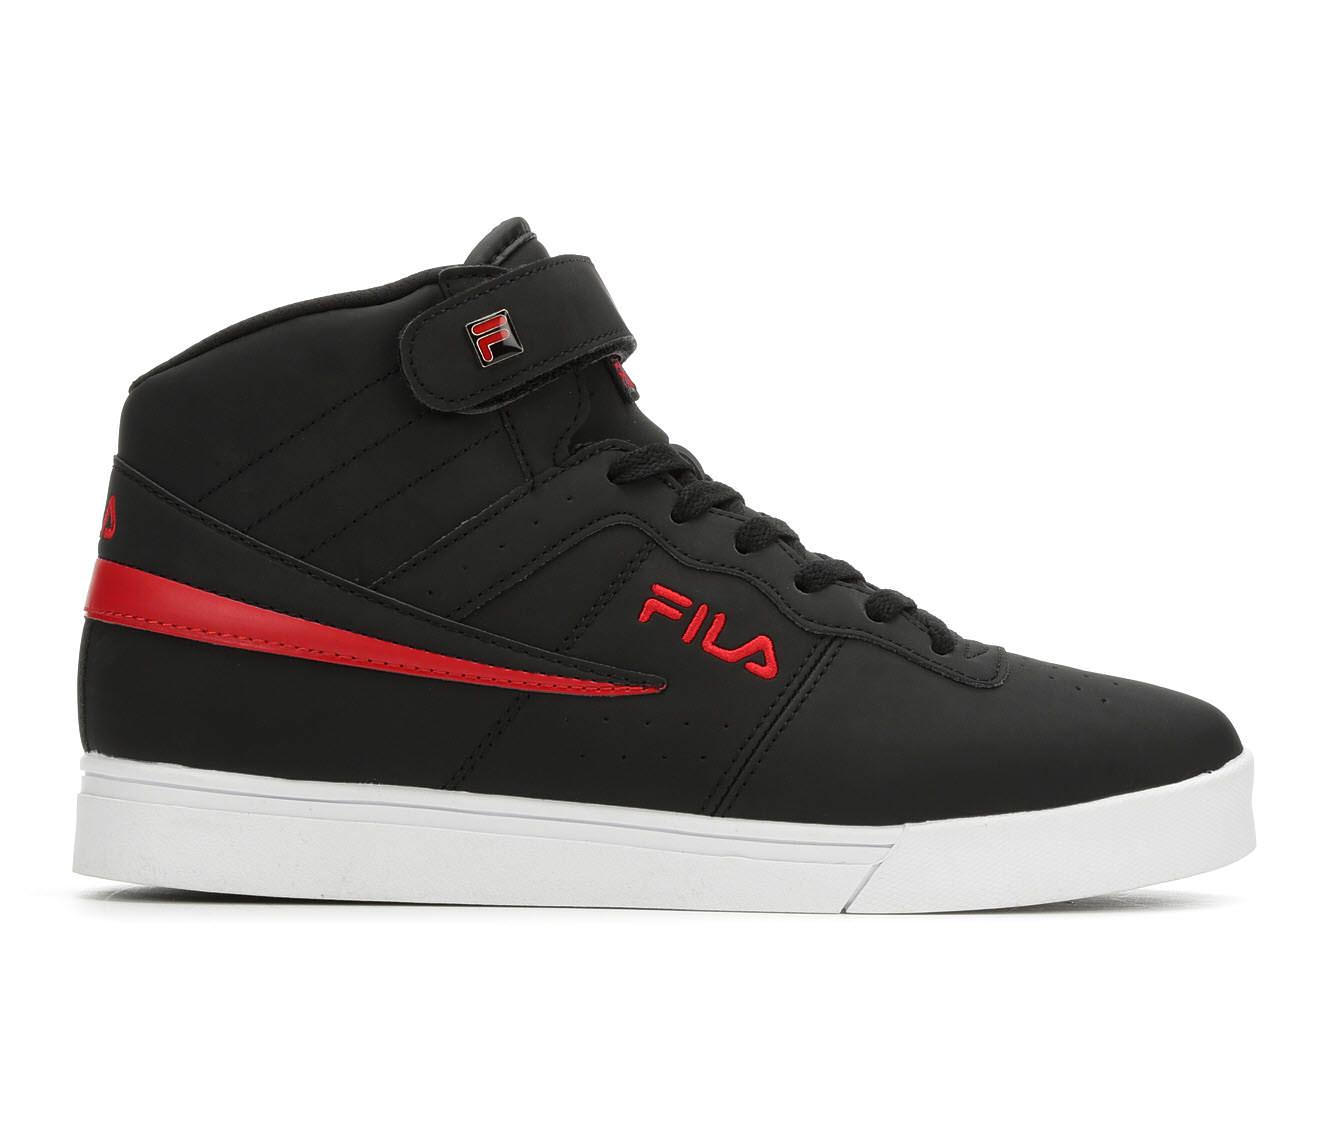 Fila Synthetic Vulc 13 Mp Matte Athletic Shoe in Black,Red,White (Black ...